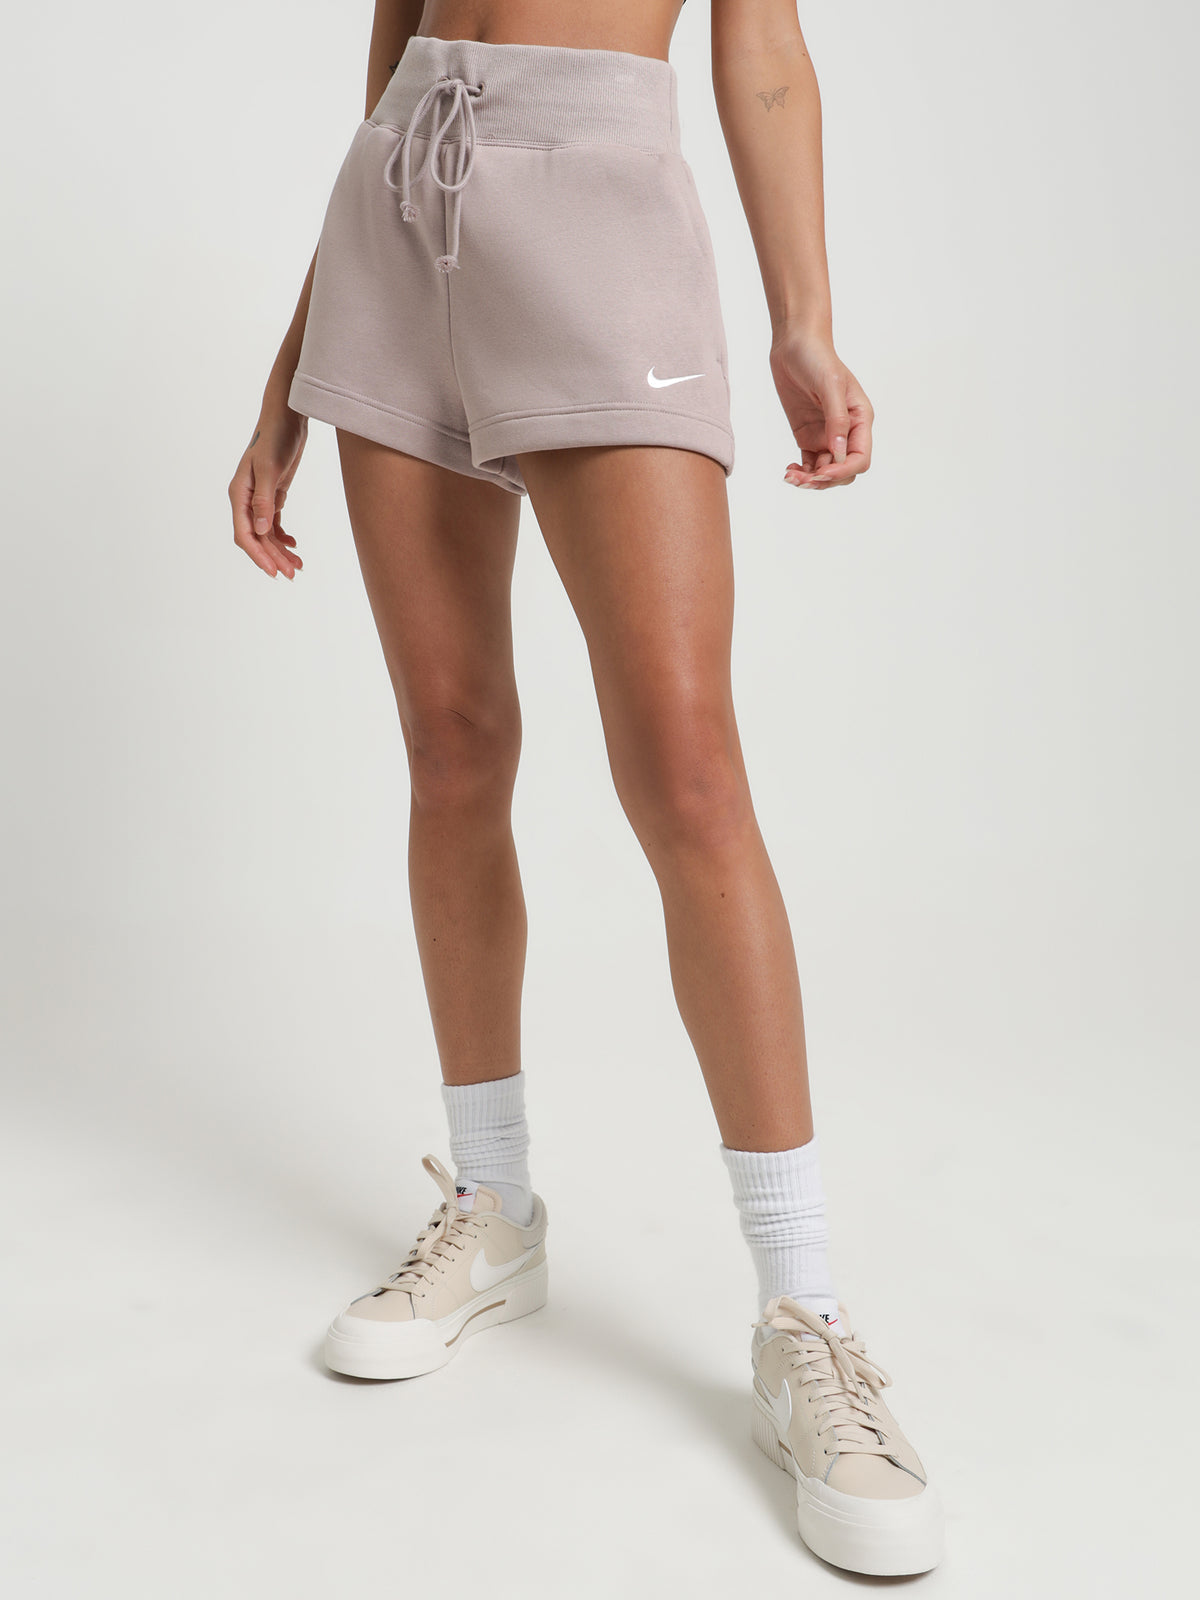 Phoenix Diffused Fleece in Store Highrise - Taupe Sportswear Shorts Glue